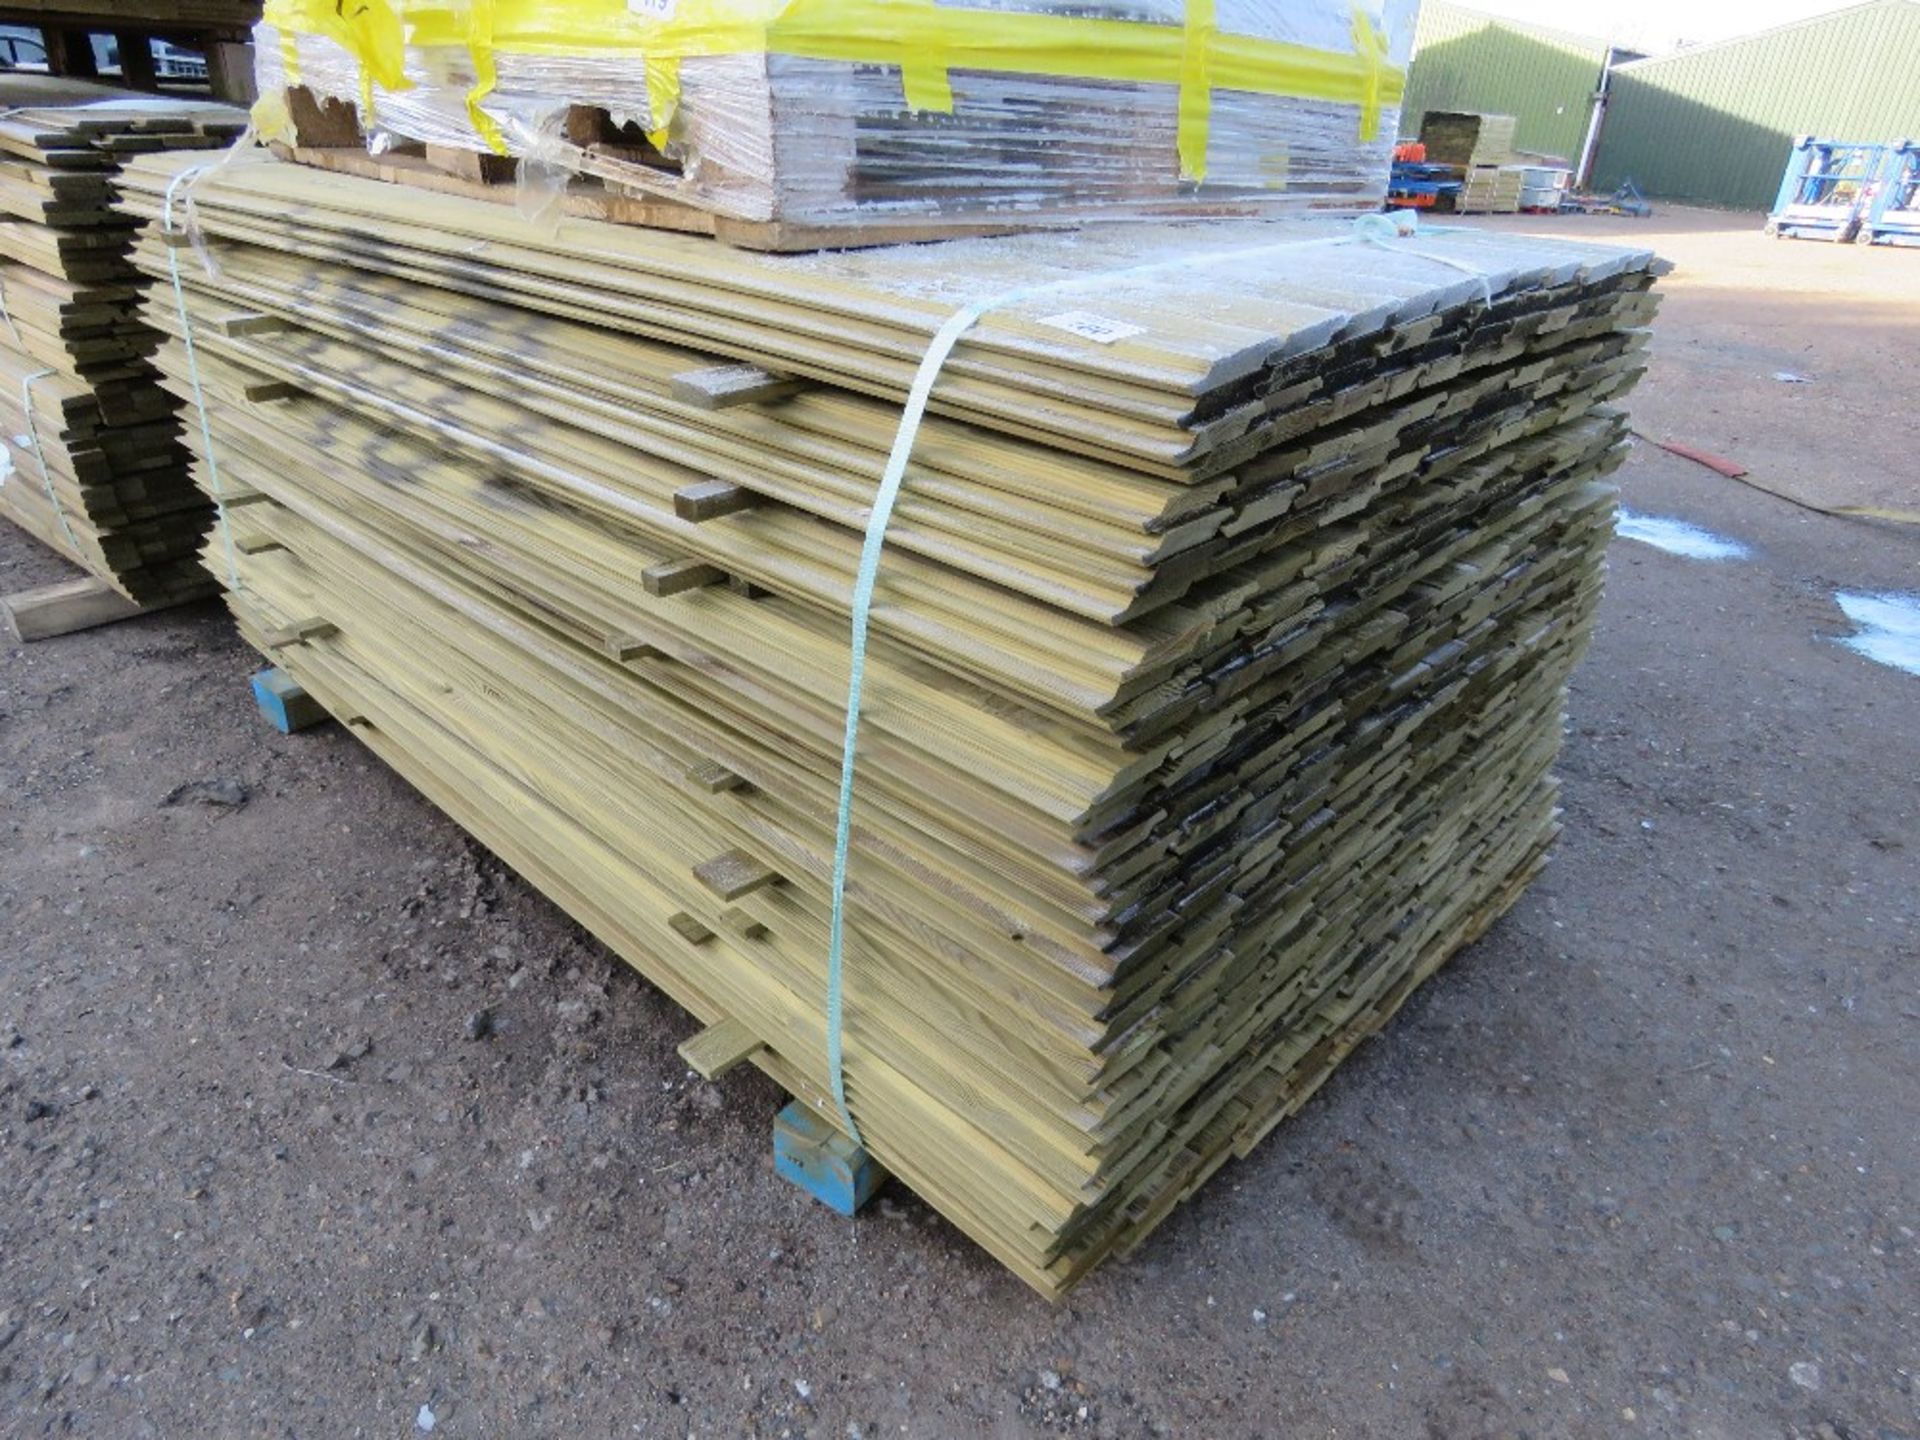 LARGE PACK OF PRESSURE TREATED SHIPLAP FENCE CLADDING BOARDS. 1.73M LENGTH X 100MM WIDTH APPROX.